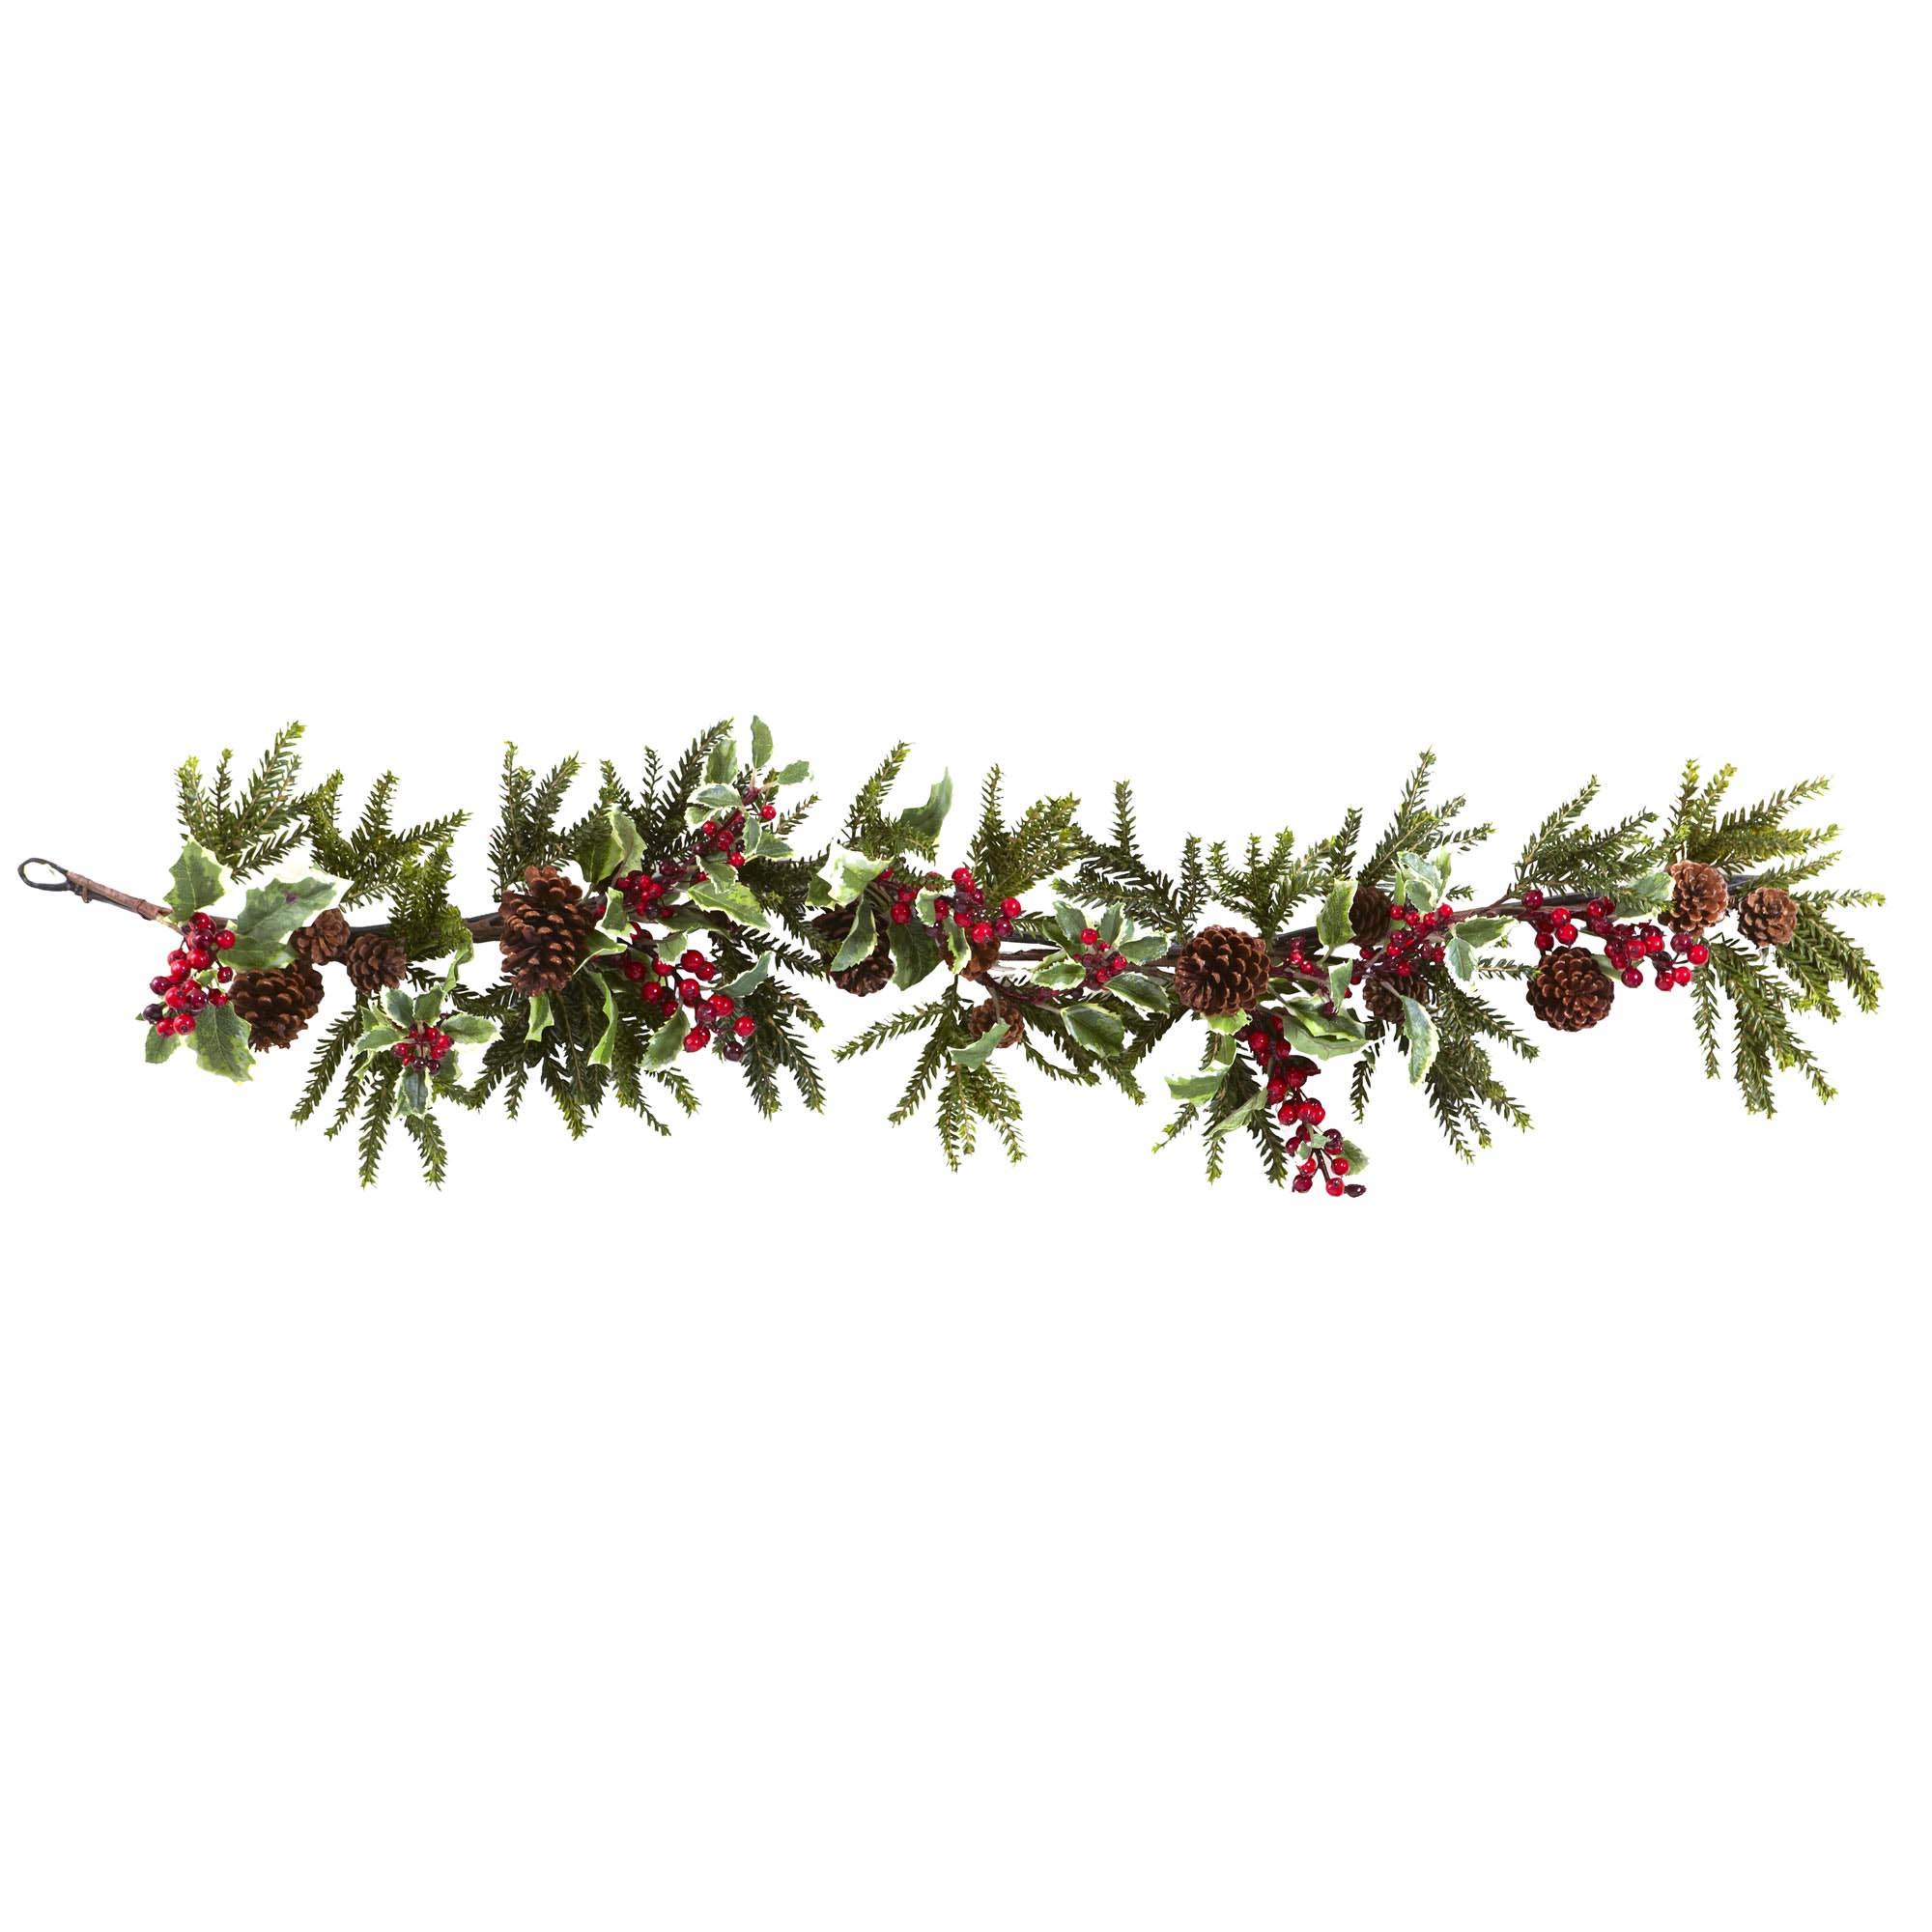 Holly garland clipart free 